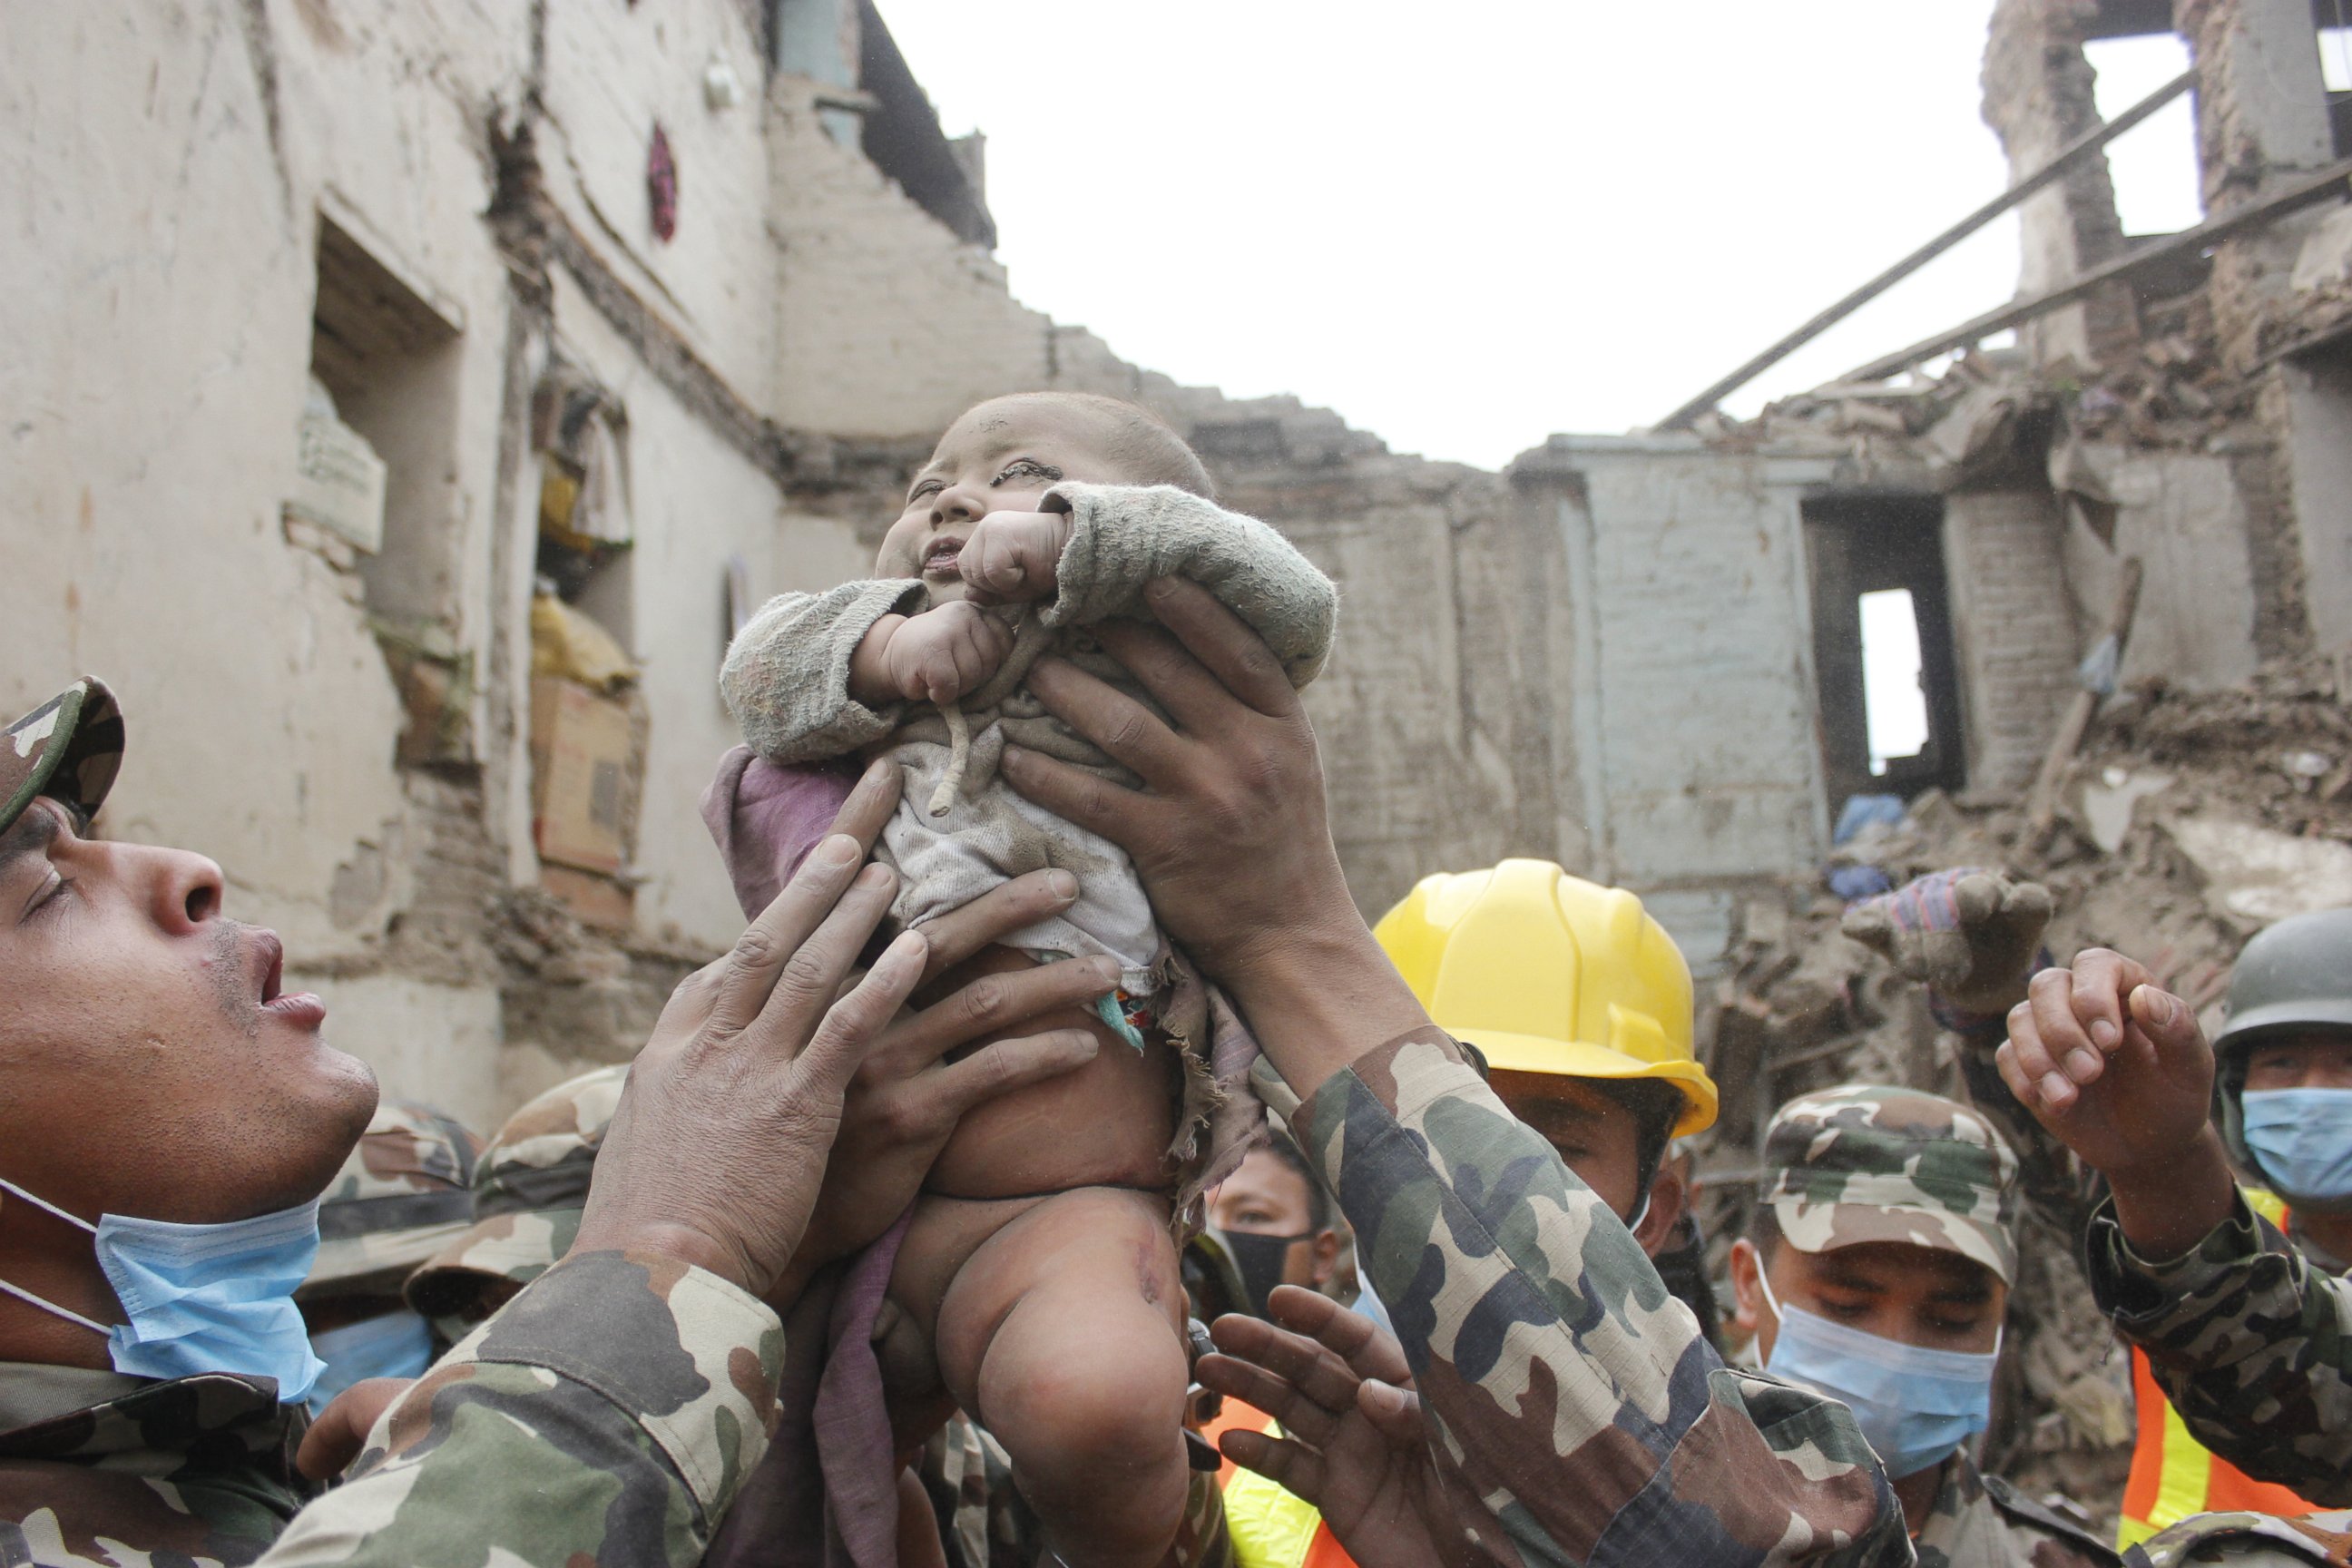 PHOTO: A 4-month-old baby was rescued from rubble in Nepal, April 26, 2015, following an earthquake.